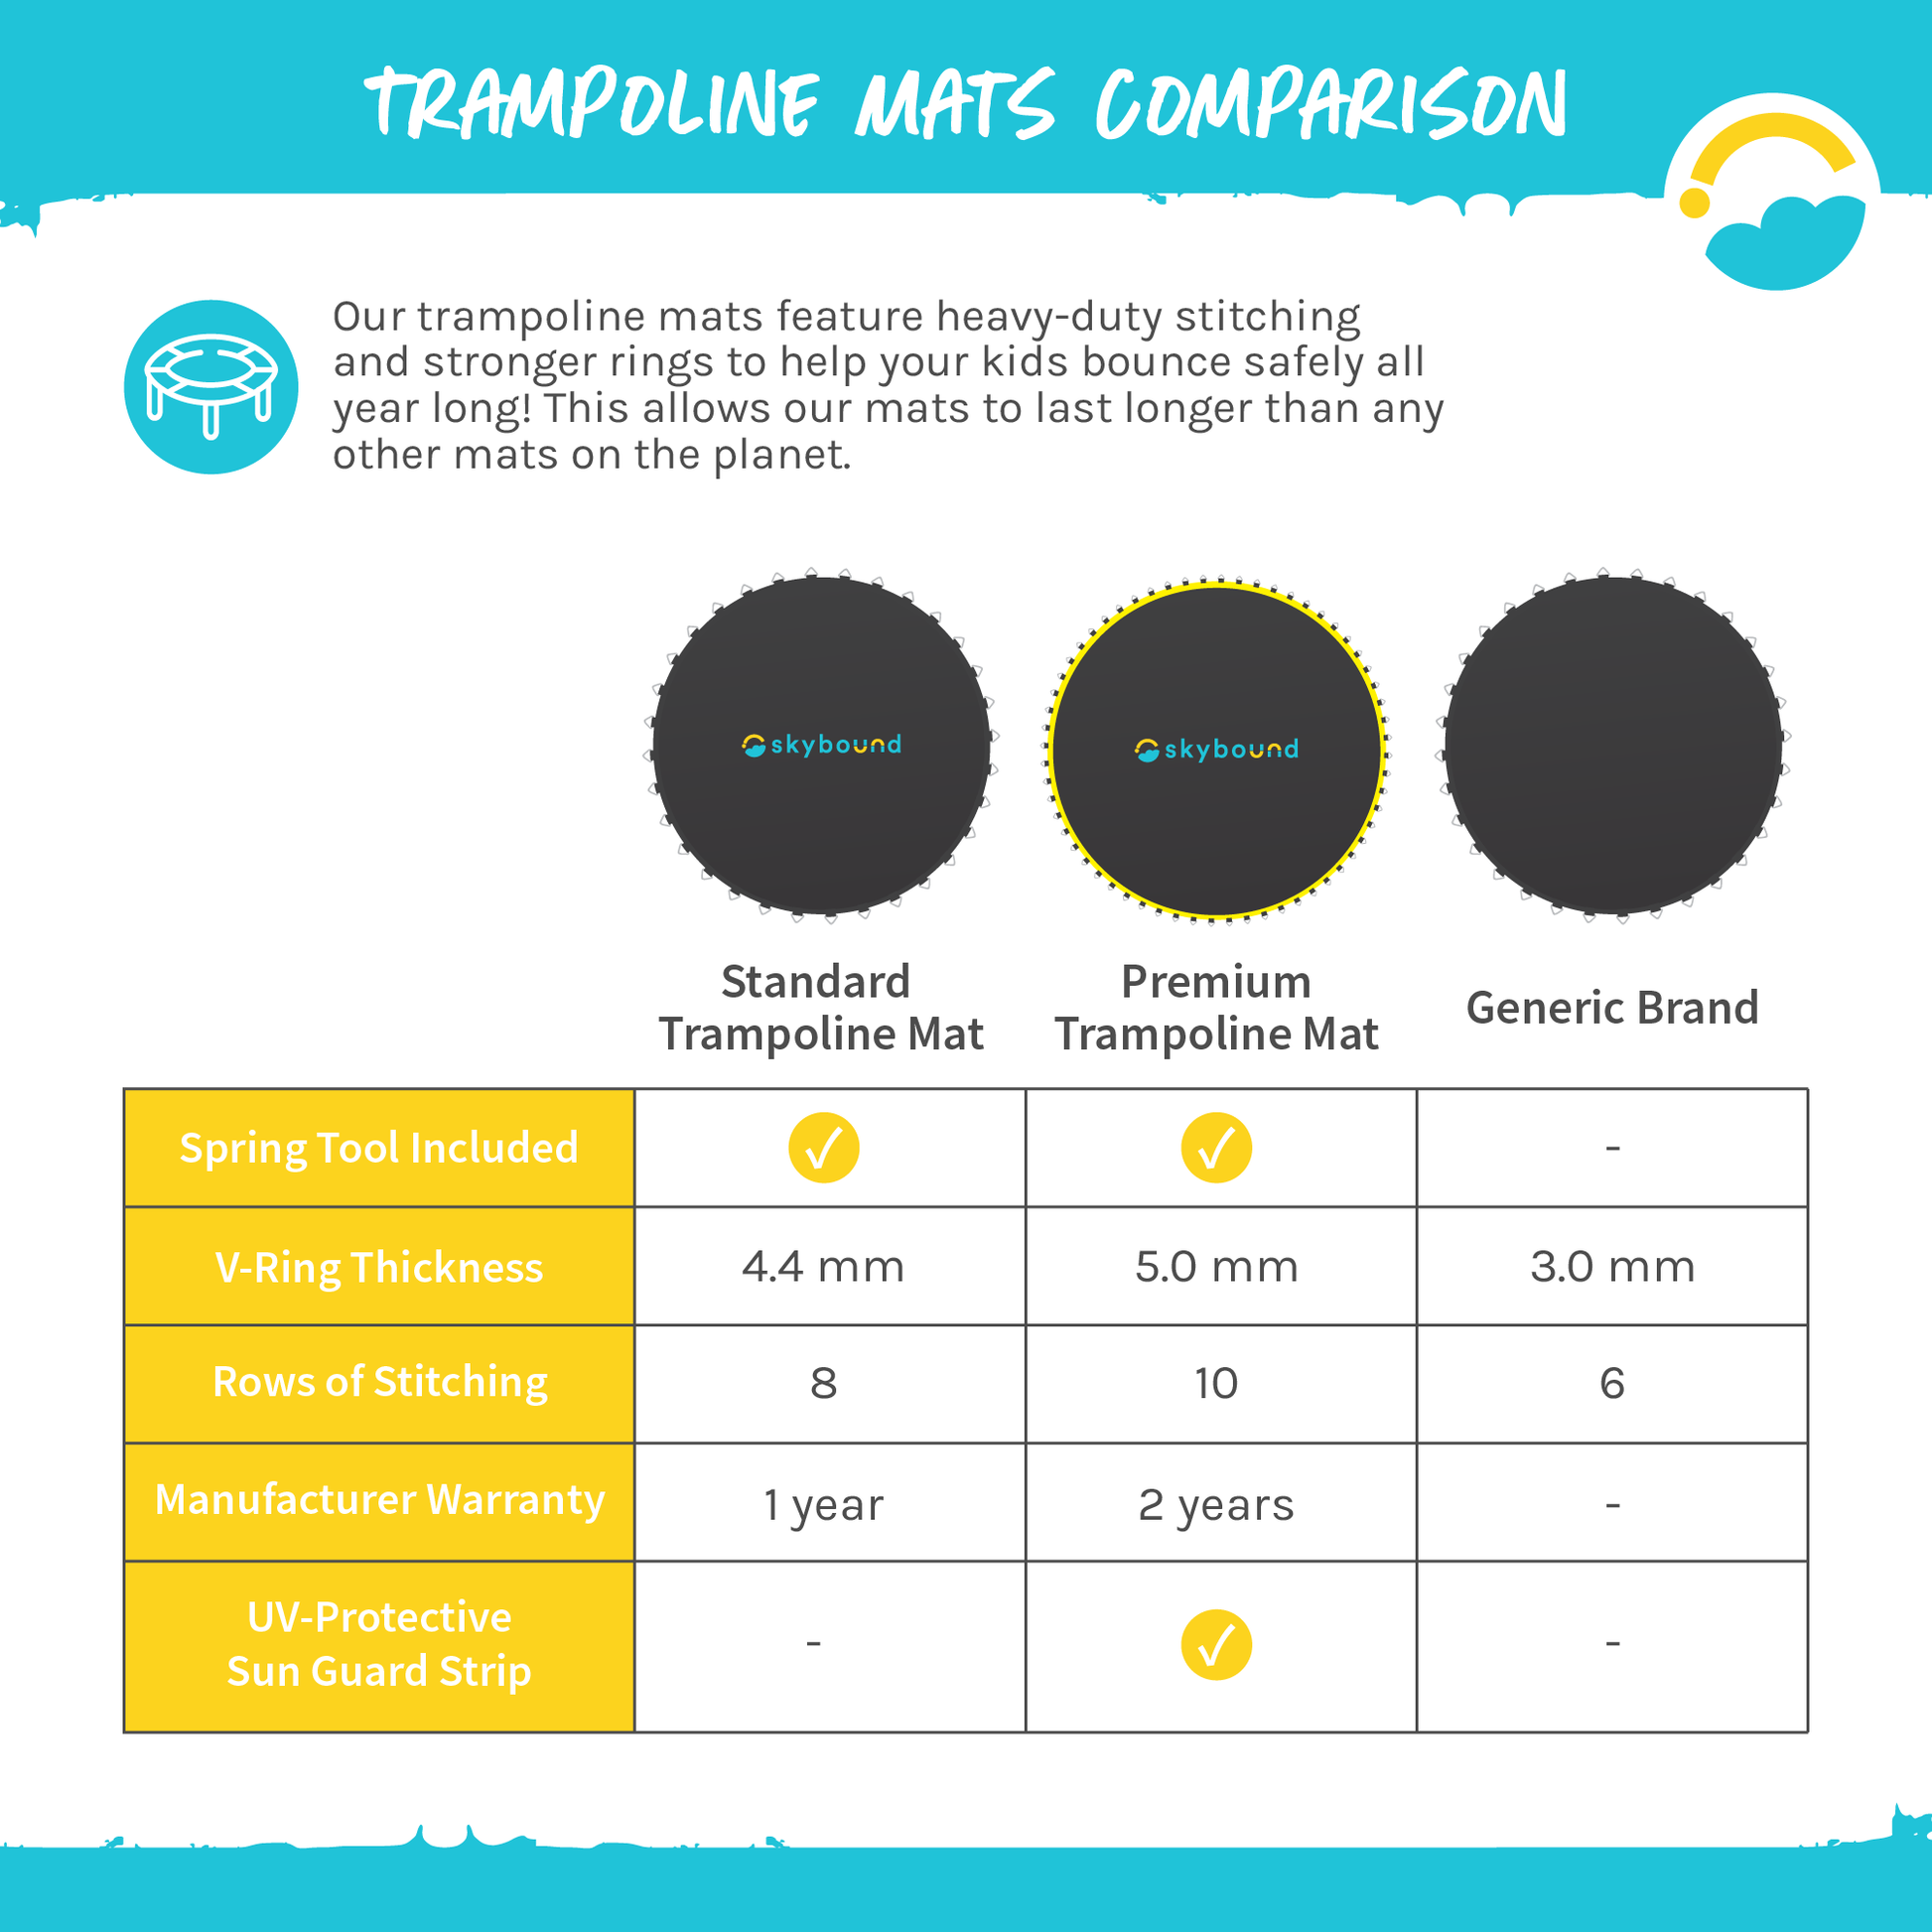 Trampoline Mats Comparison: A comparison chart between Standard Trampoline Mat, Premium Trampoline Mat, Generic Brand. Spring Tool Included: Yes, Yes, No. V-Ring Thickness: 4.4 mm, 5.0 mm, 3.0mm, Row of Stitching: 8, 10, 6. Manufacturer Warranty: 1 Year, 2 Years, No Warranty. UV-Protective Sun Guard Strip: No, Yes, No.